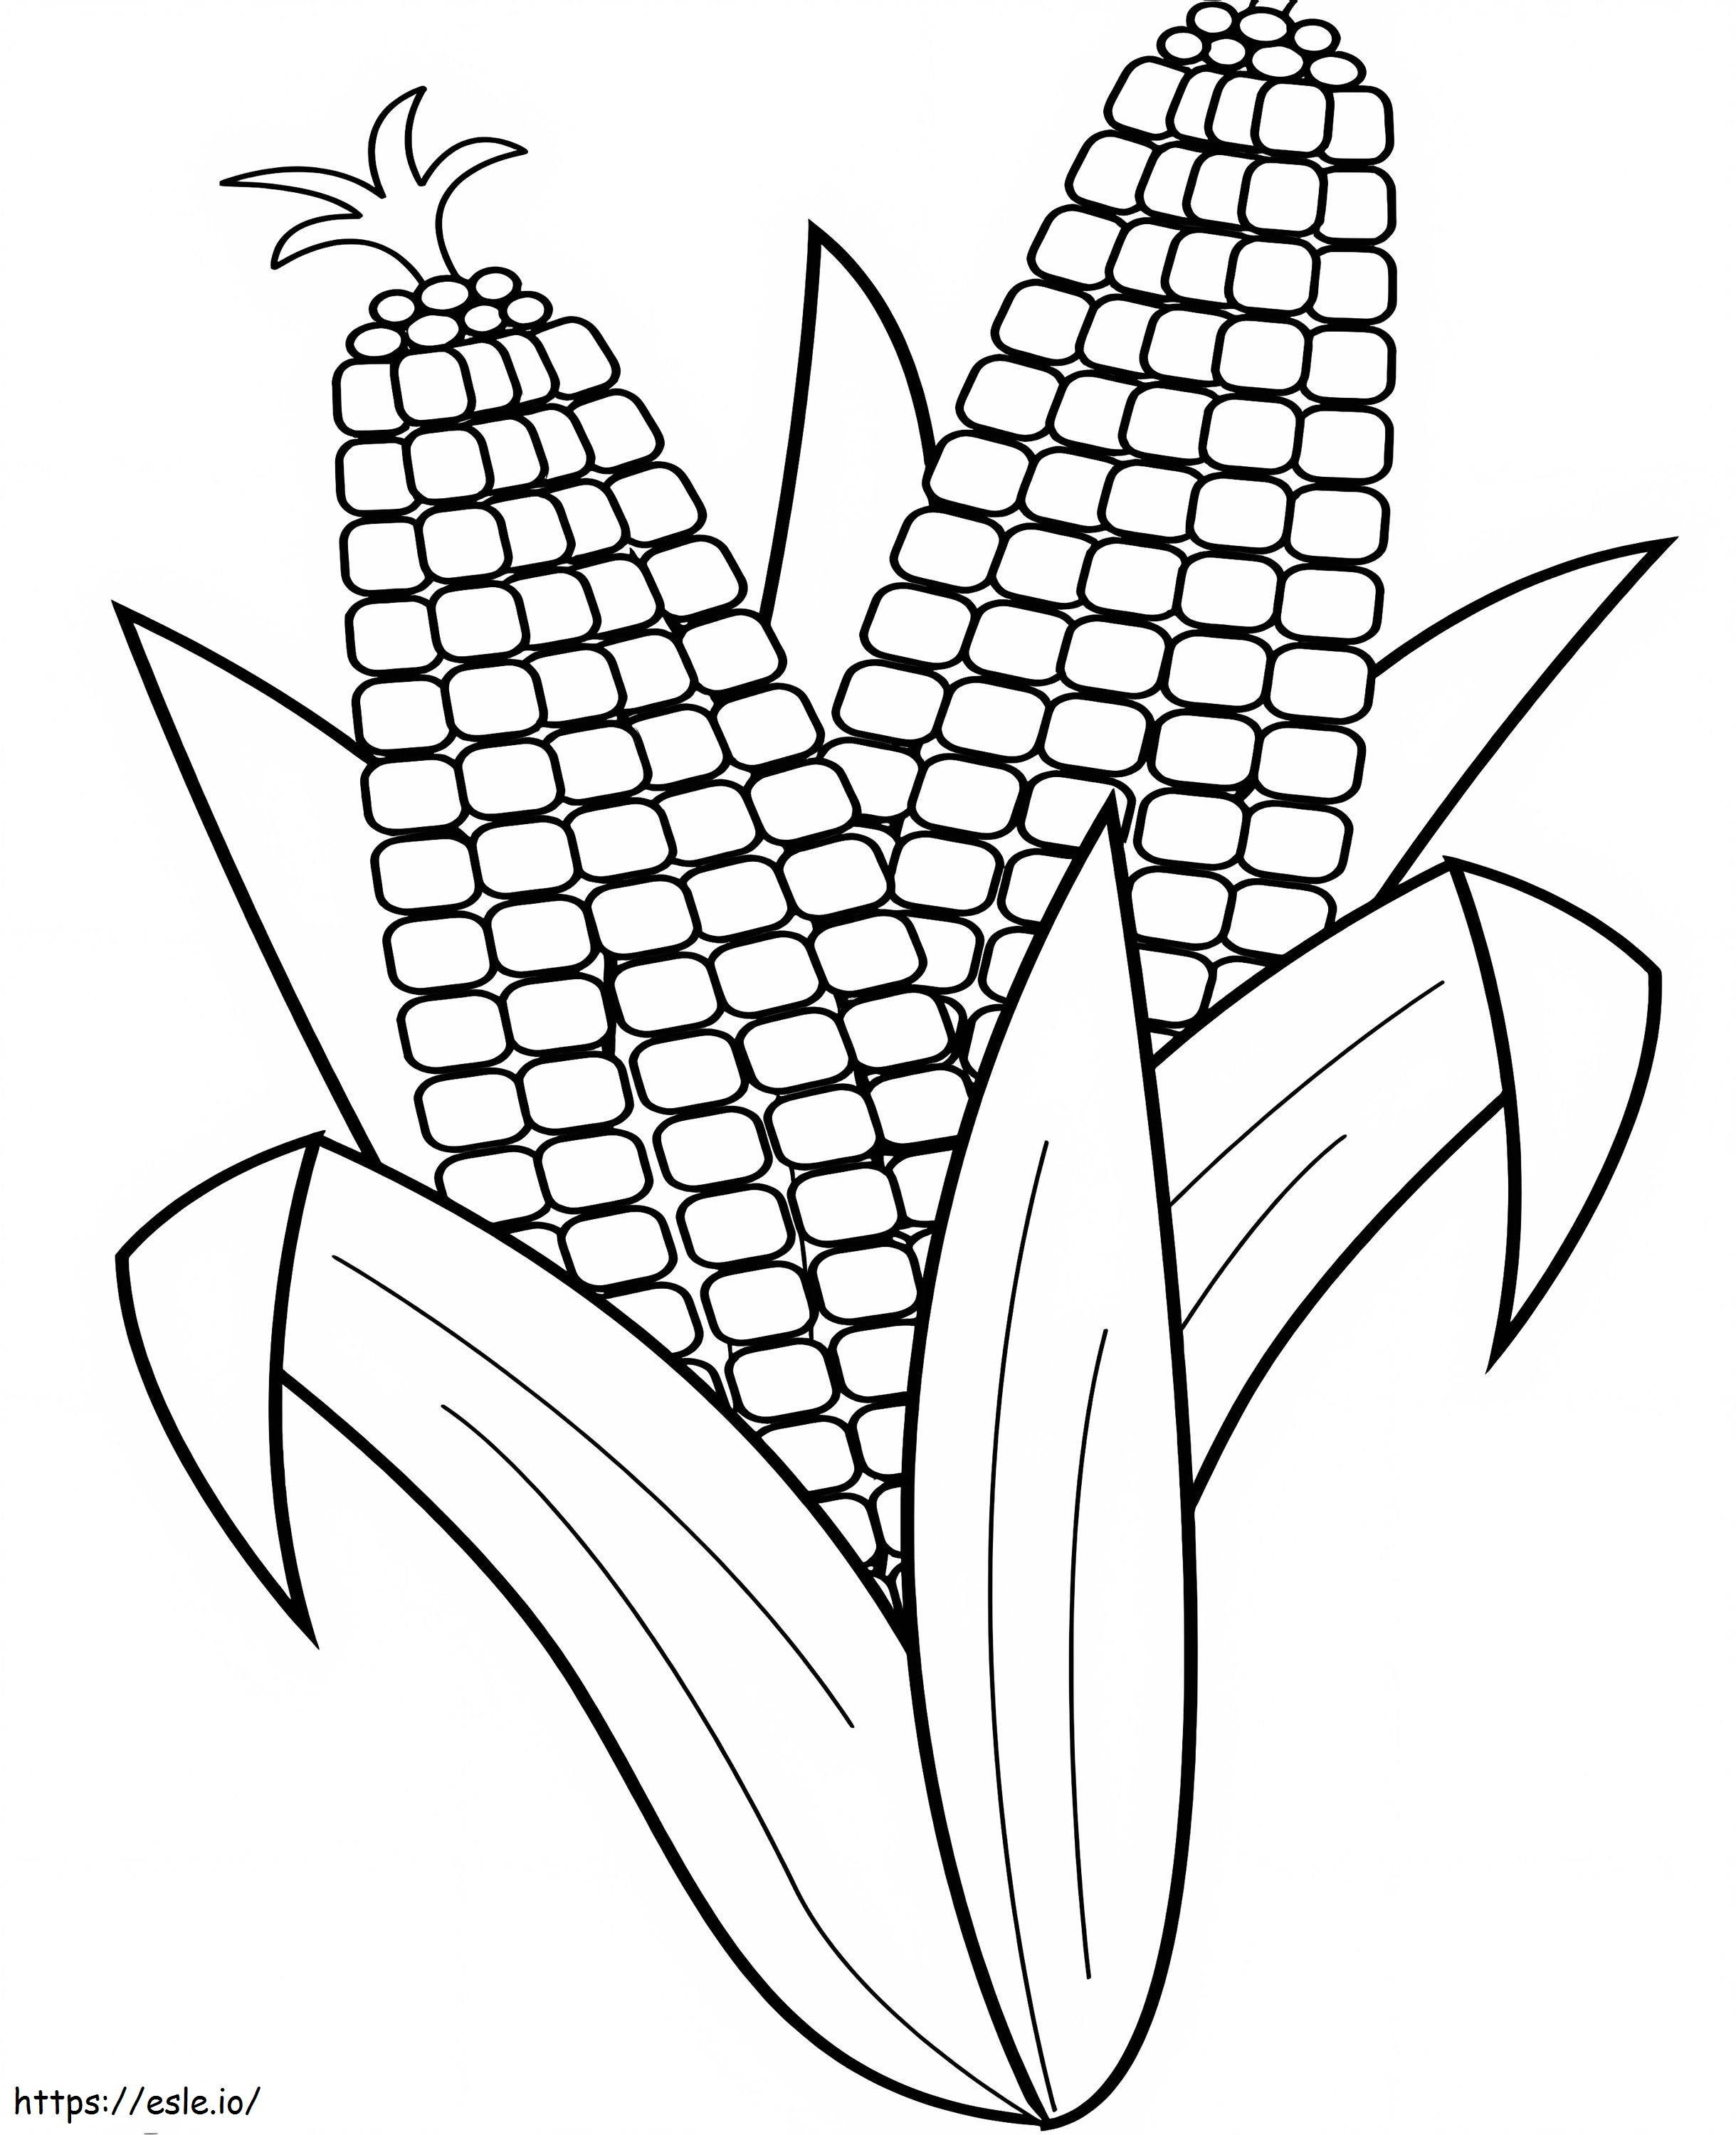 Adorable Corn coloring page